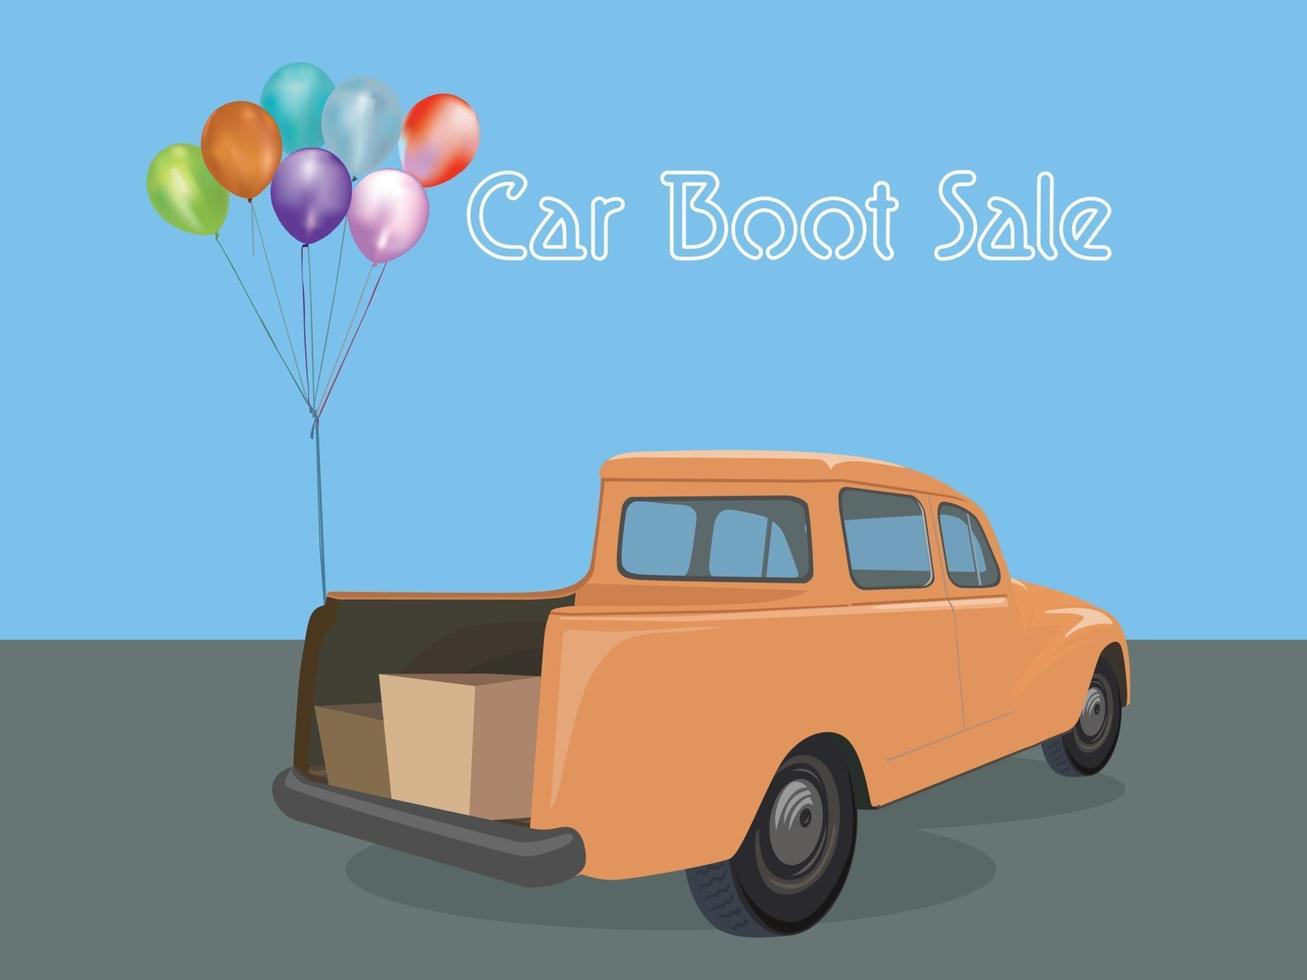 Car Boot Sale illustration graphic vector